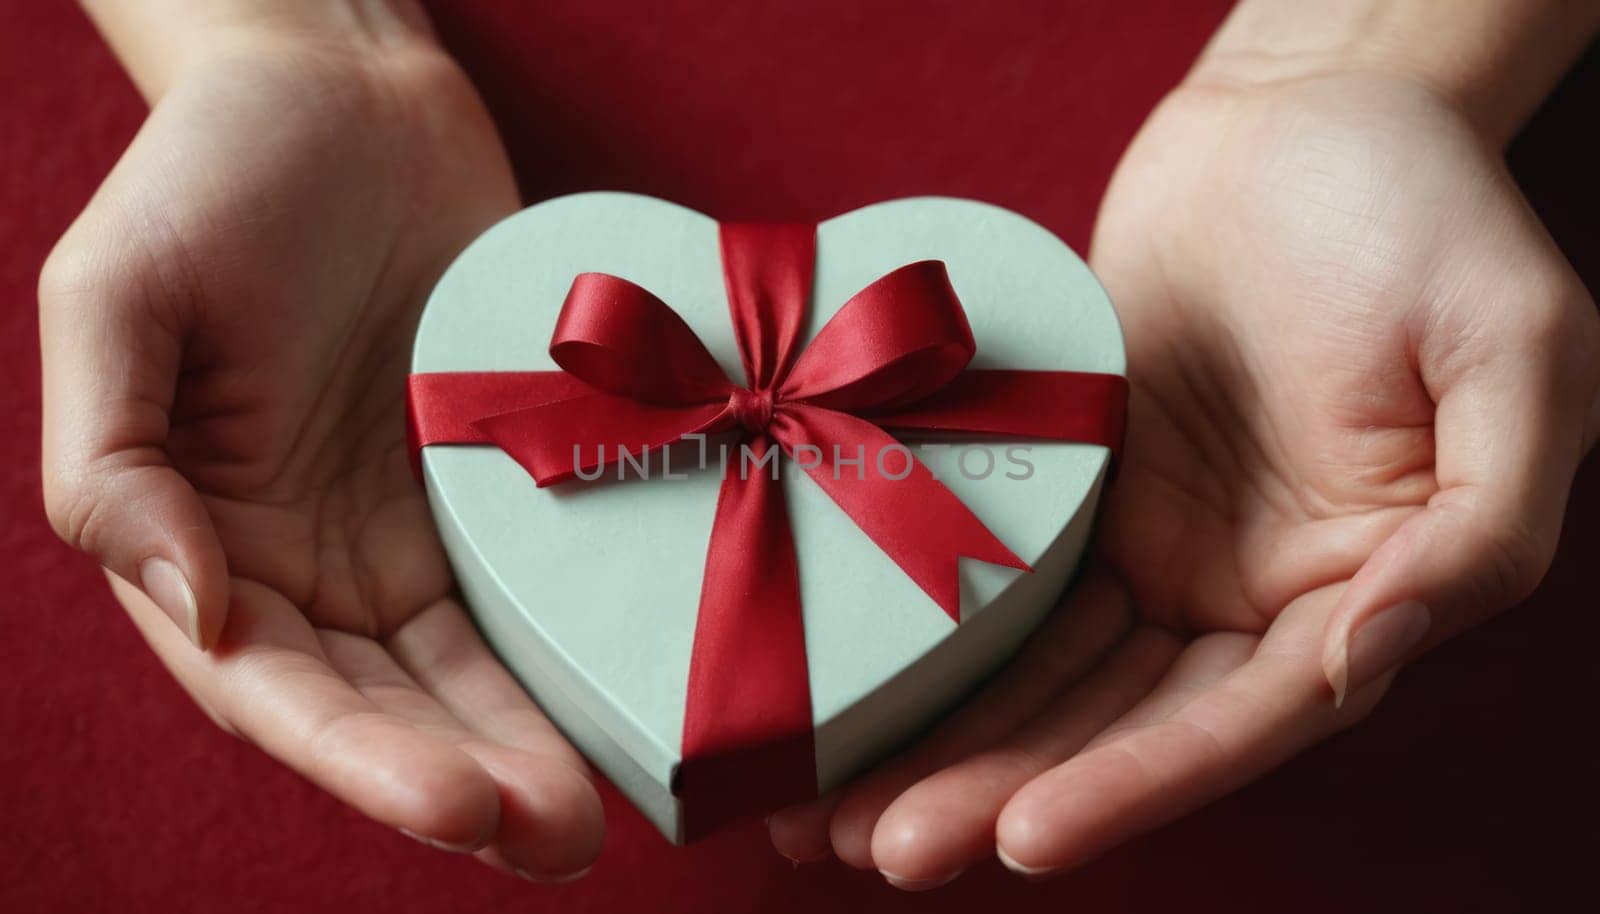 Pair of Hands Holding Heart-Shaped Gift Bo by Andre1ns